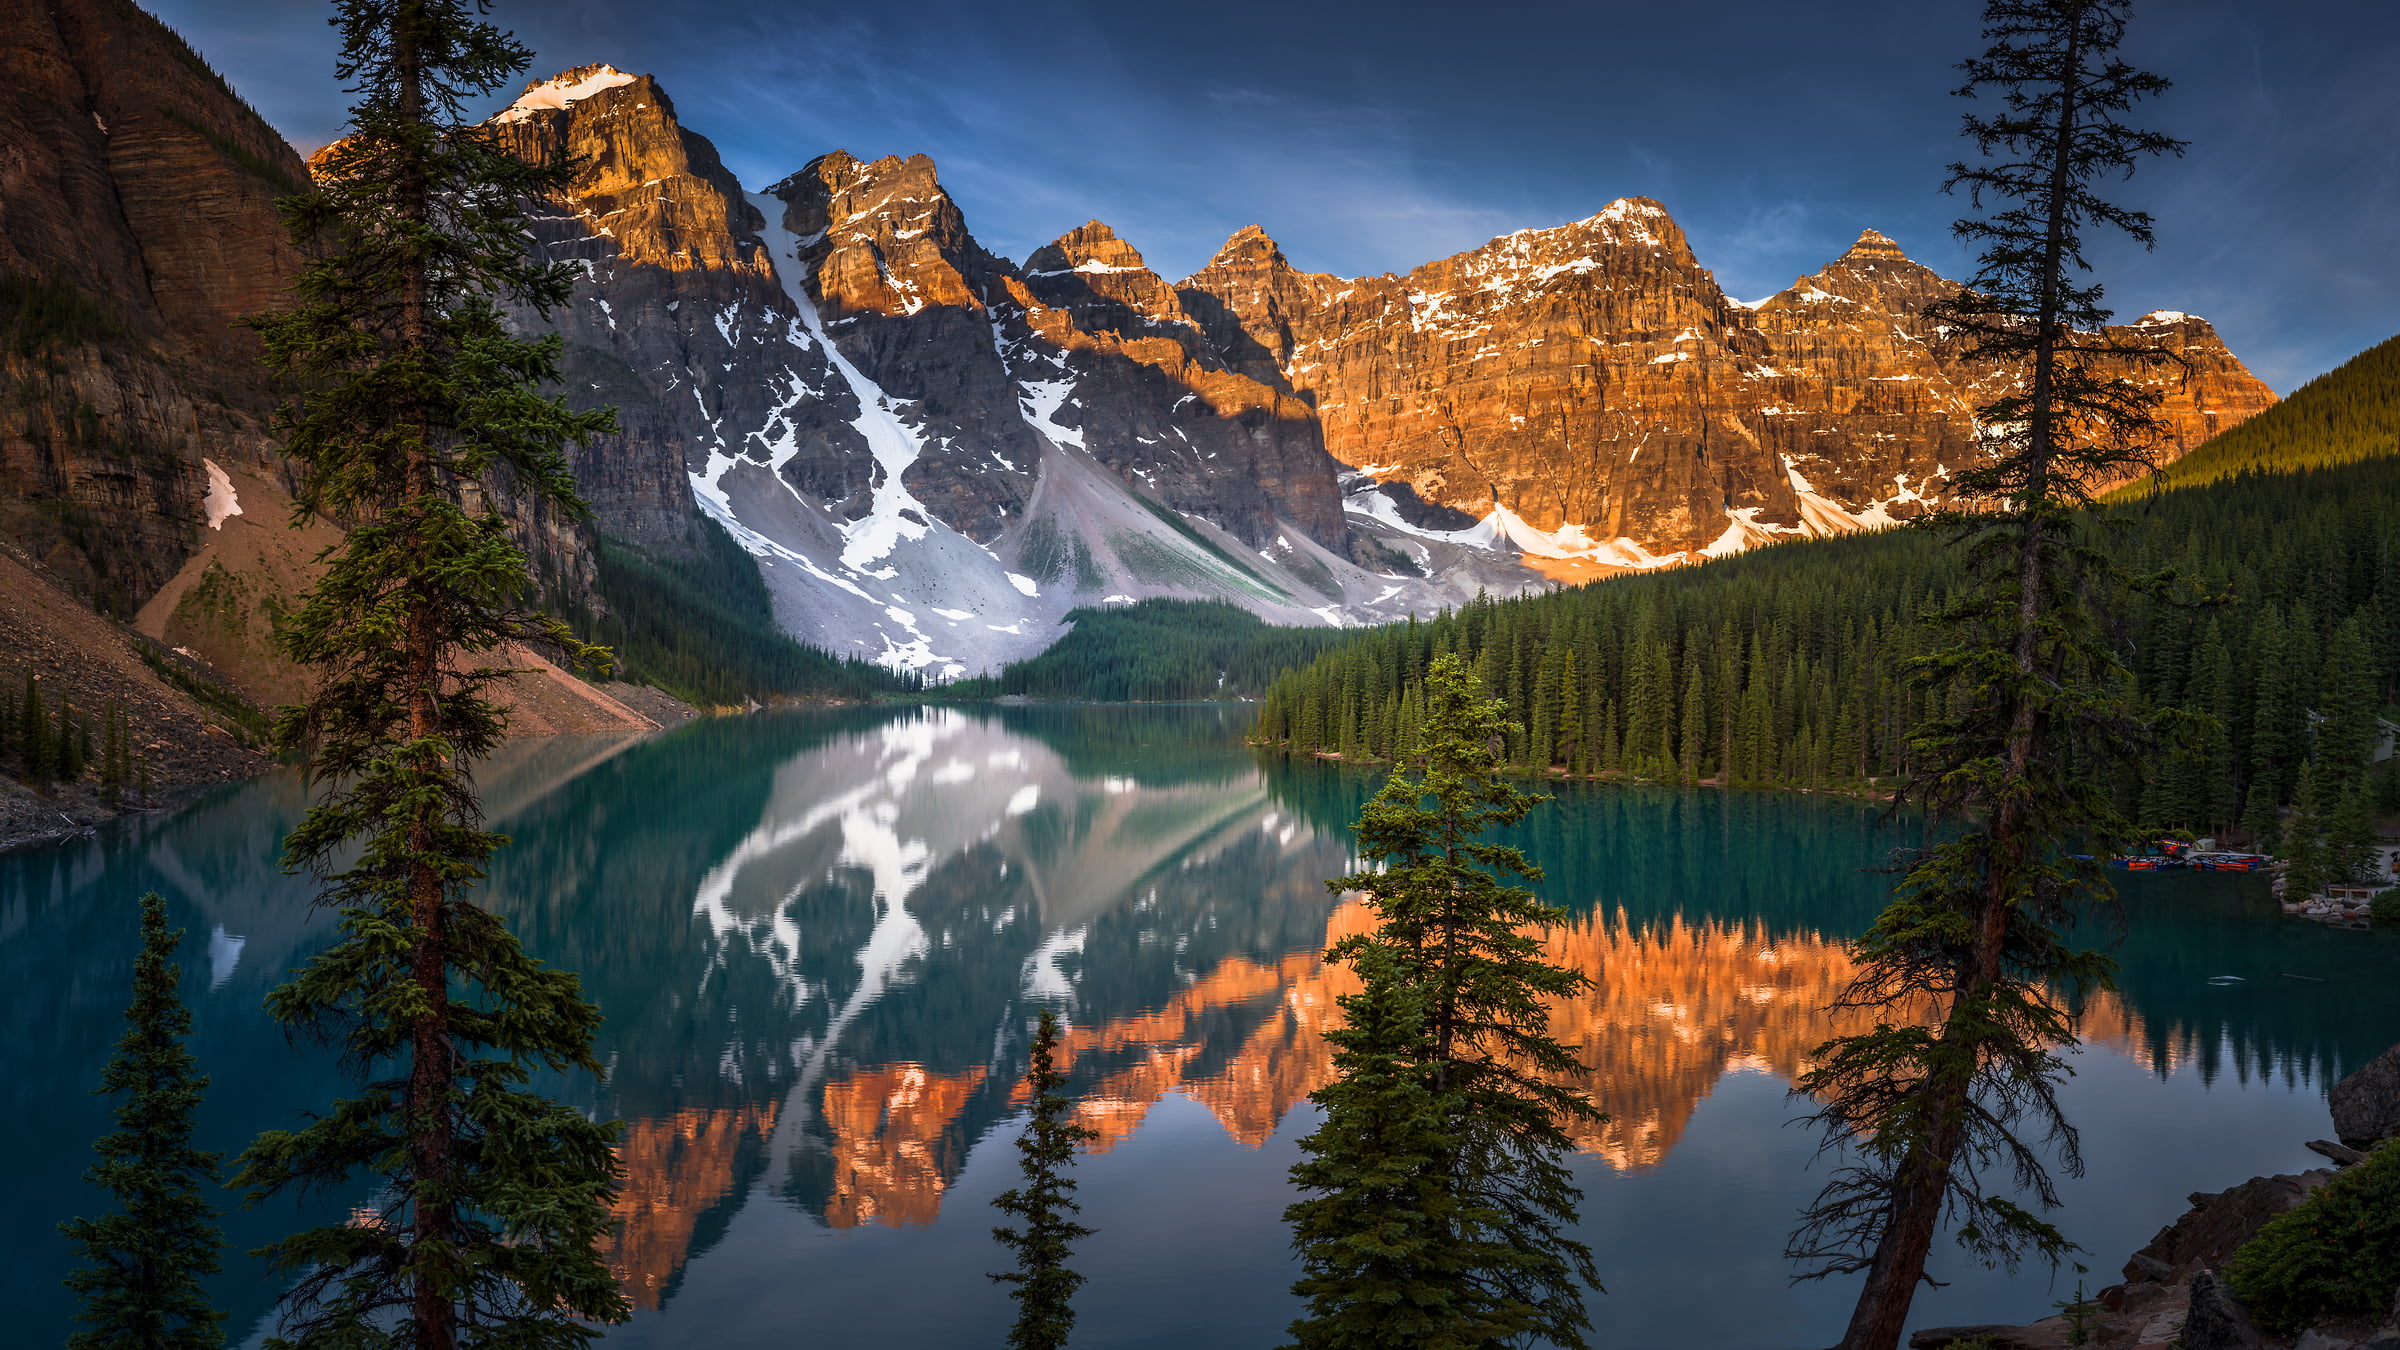 360 megapixels! A very high resolution, large-format VAST photo print of Moraine Lake with trees in the foreground, the lake in the middle and mountains in the background; landscape photograph created by Tim Shields in Moraine Lake, Banff National Park, Canada.